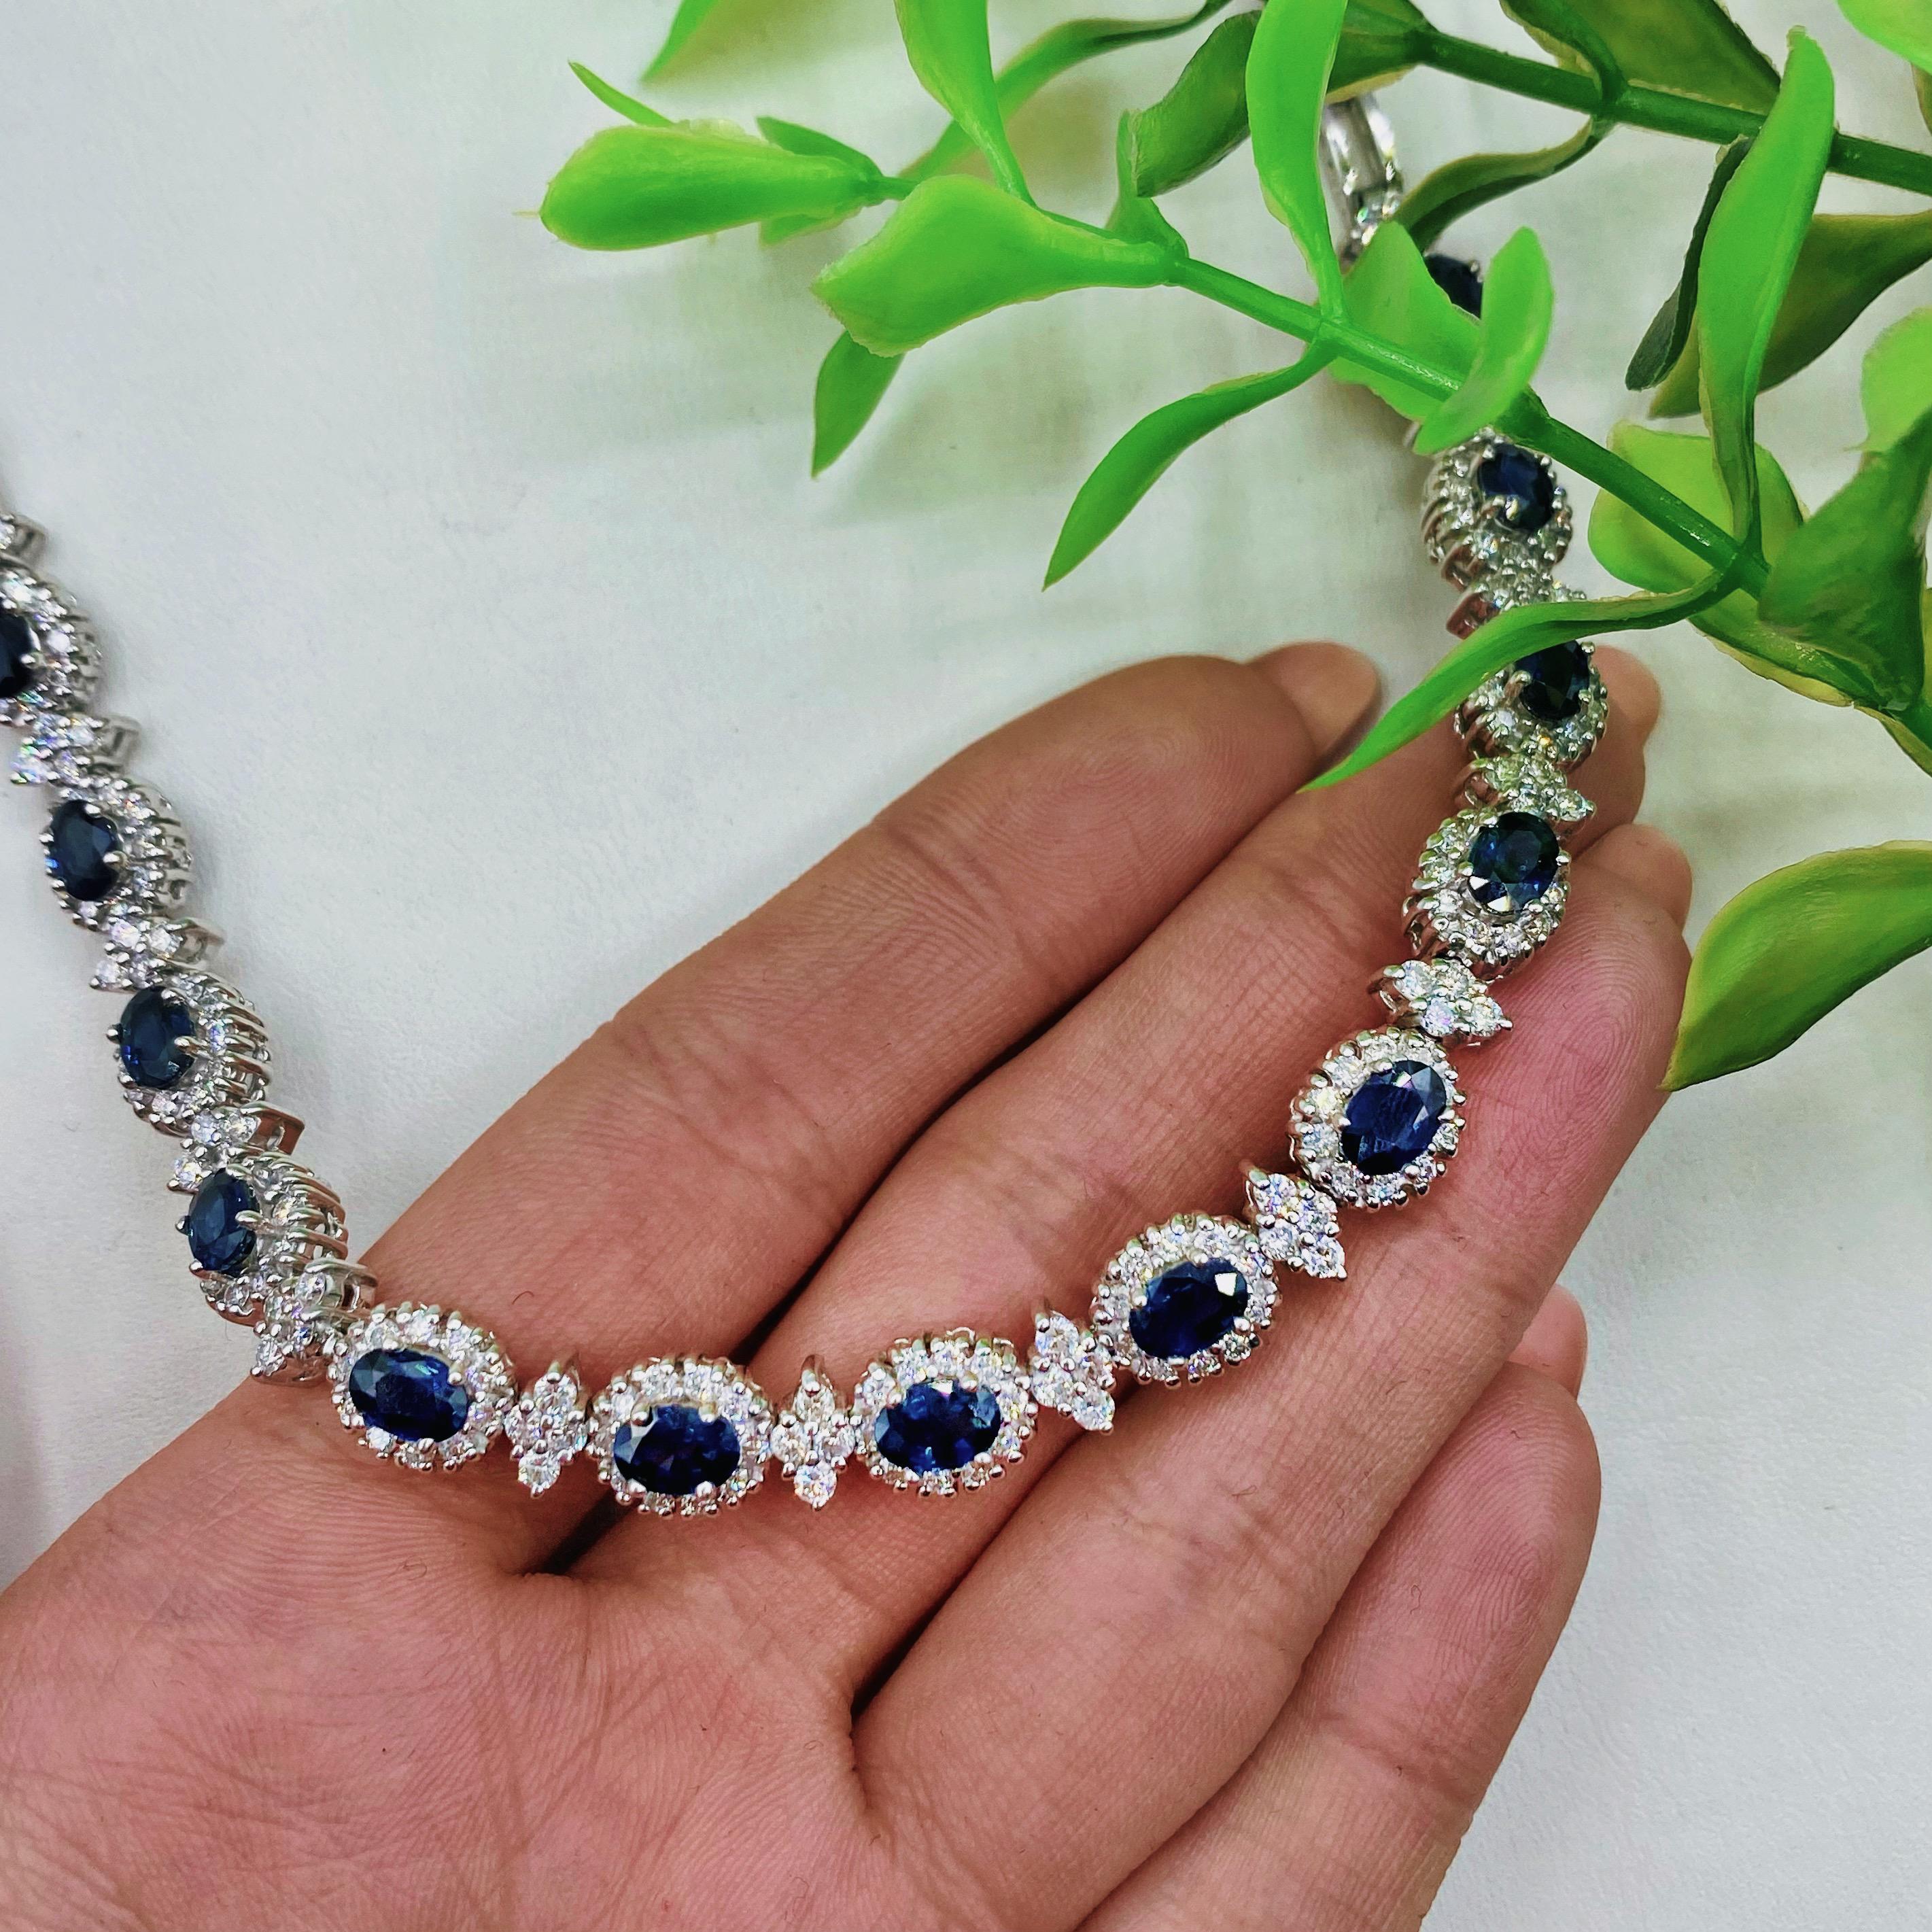 14kt white gold necklace
4.00ct total weight diamonds
9.00ct total Sapphires
Round brilliant cut diamonds
Color/Clarity: F/G-VS2/SI1
17.50